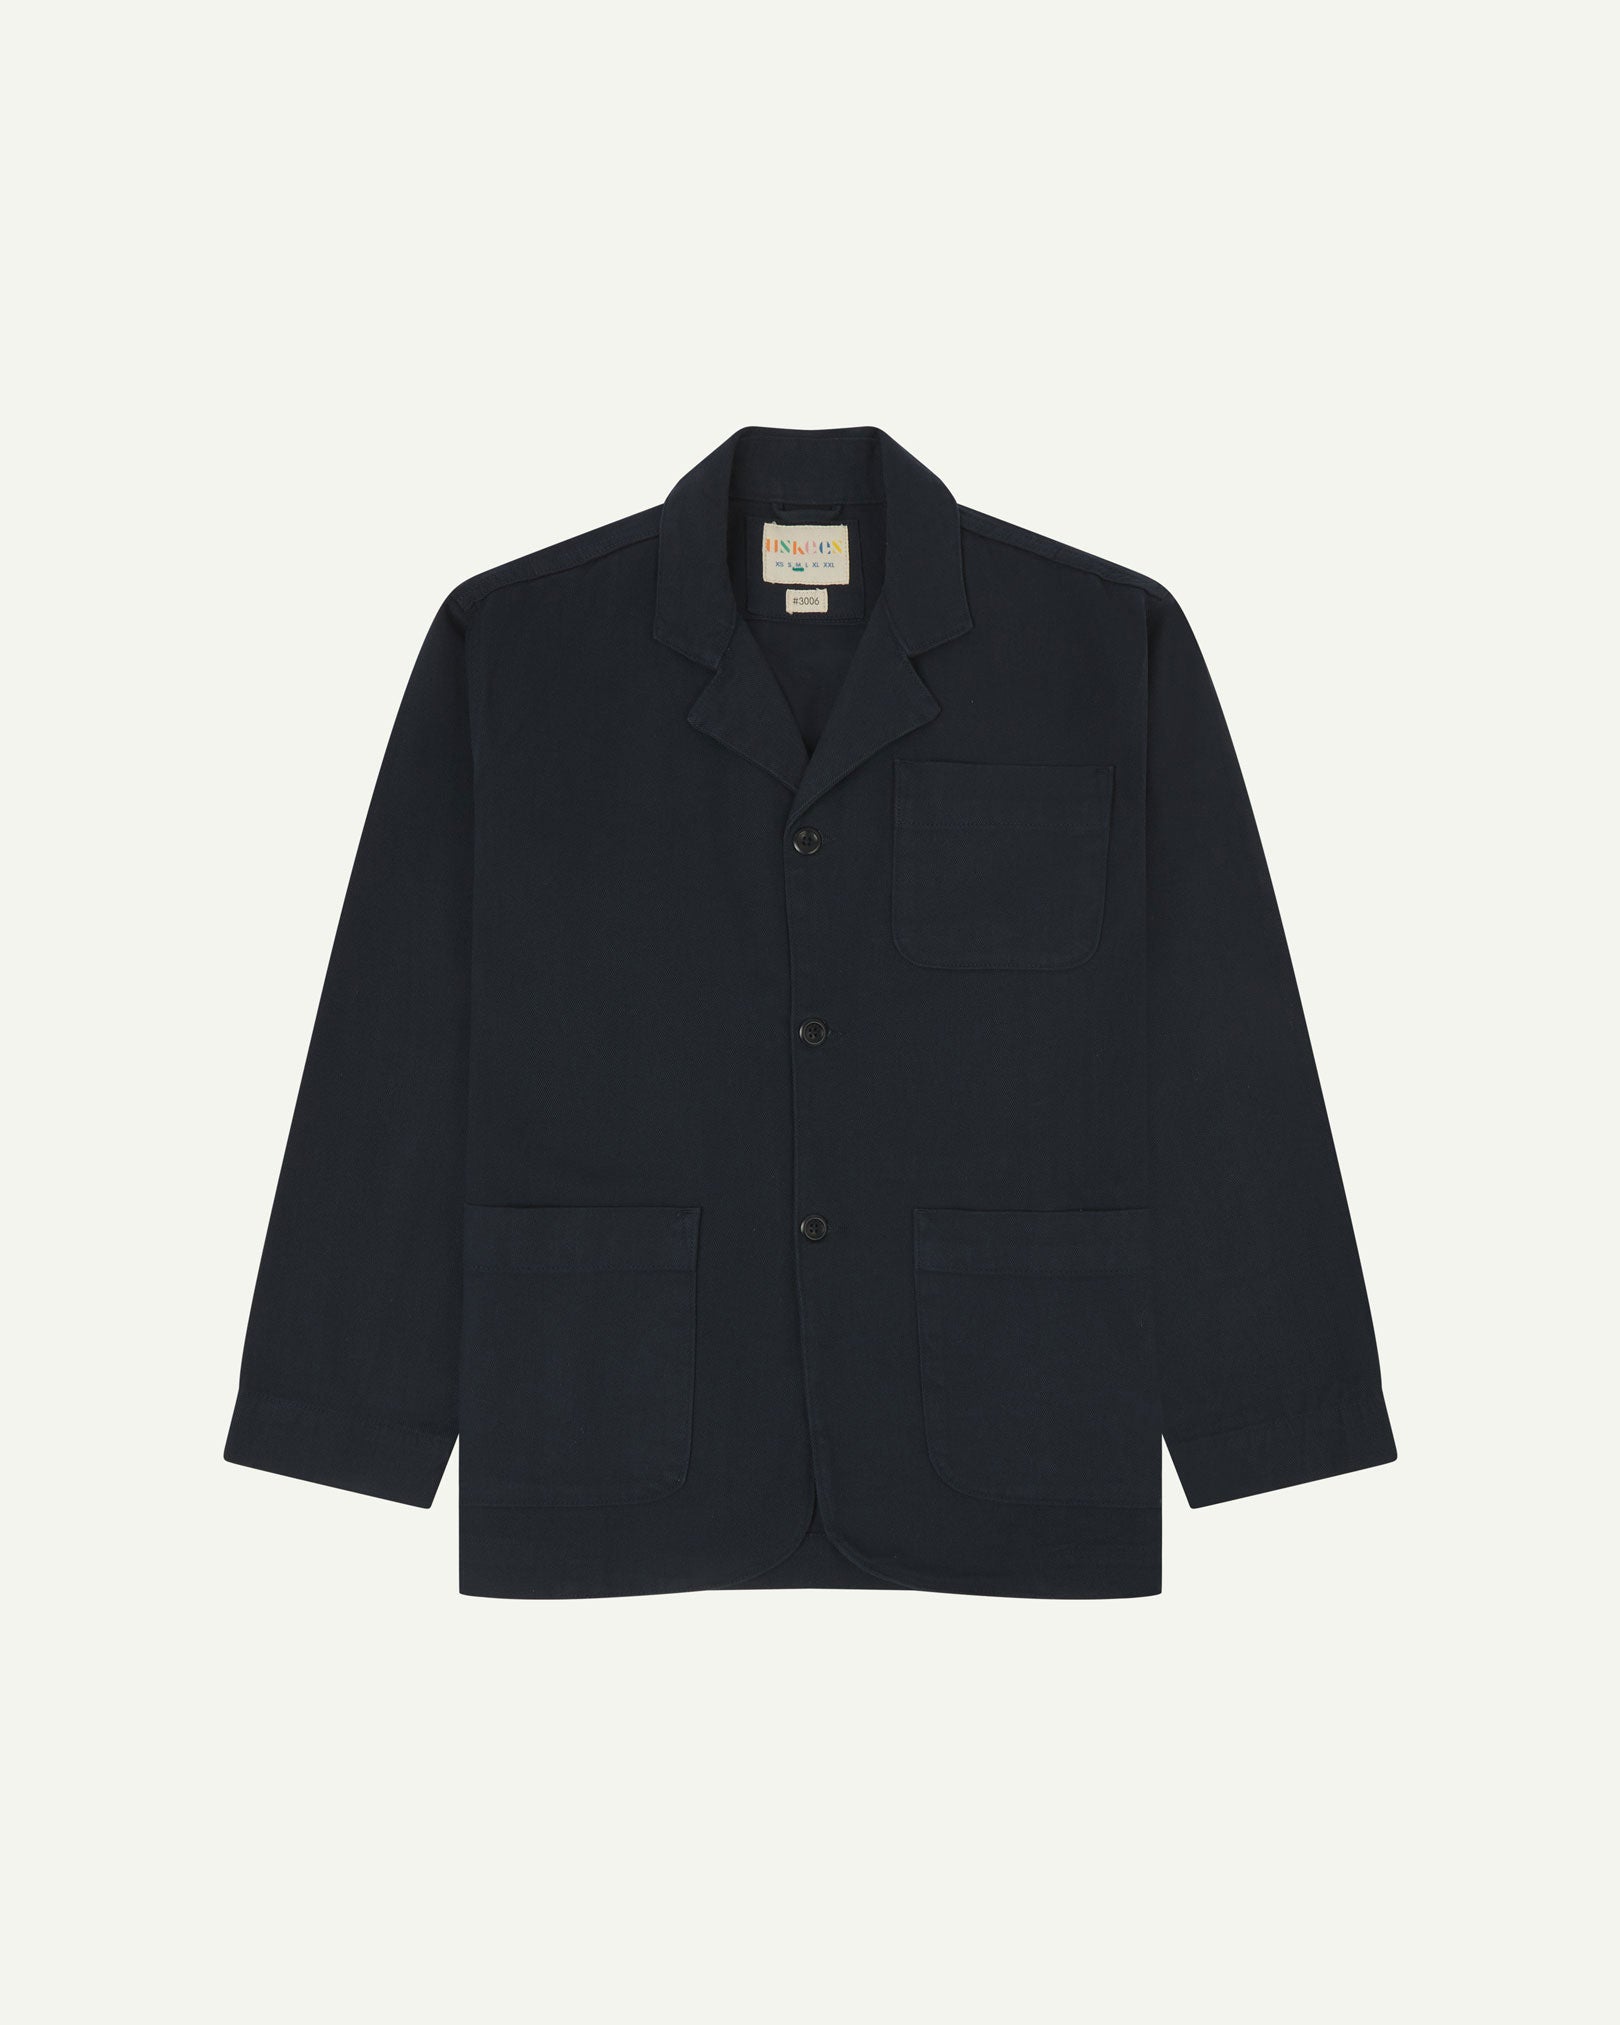 Dark blue (blueberry) buttoned organic cotton-drill blazer from Uskees with clear view of three patch pockets and Uskees branding label.